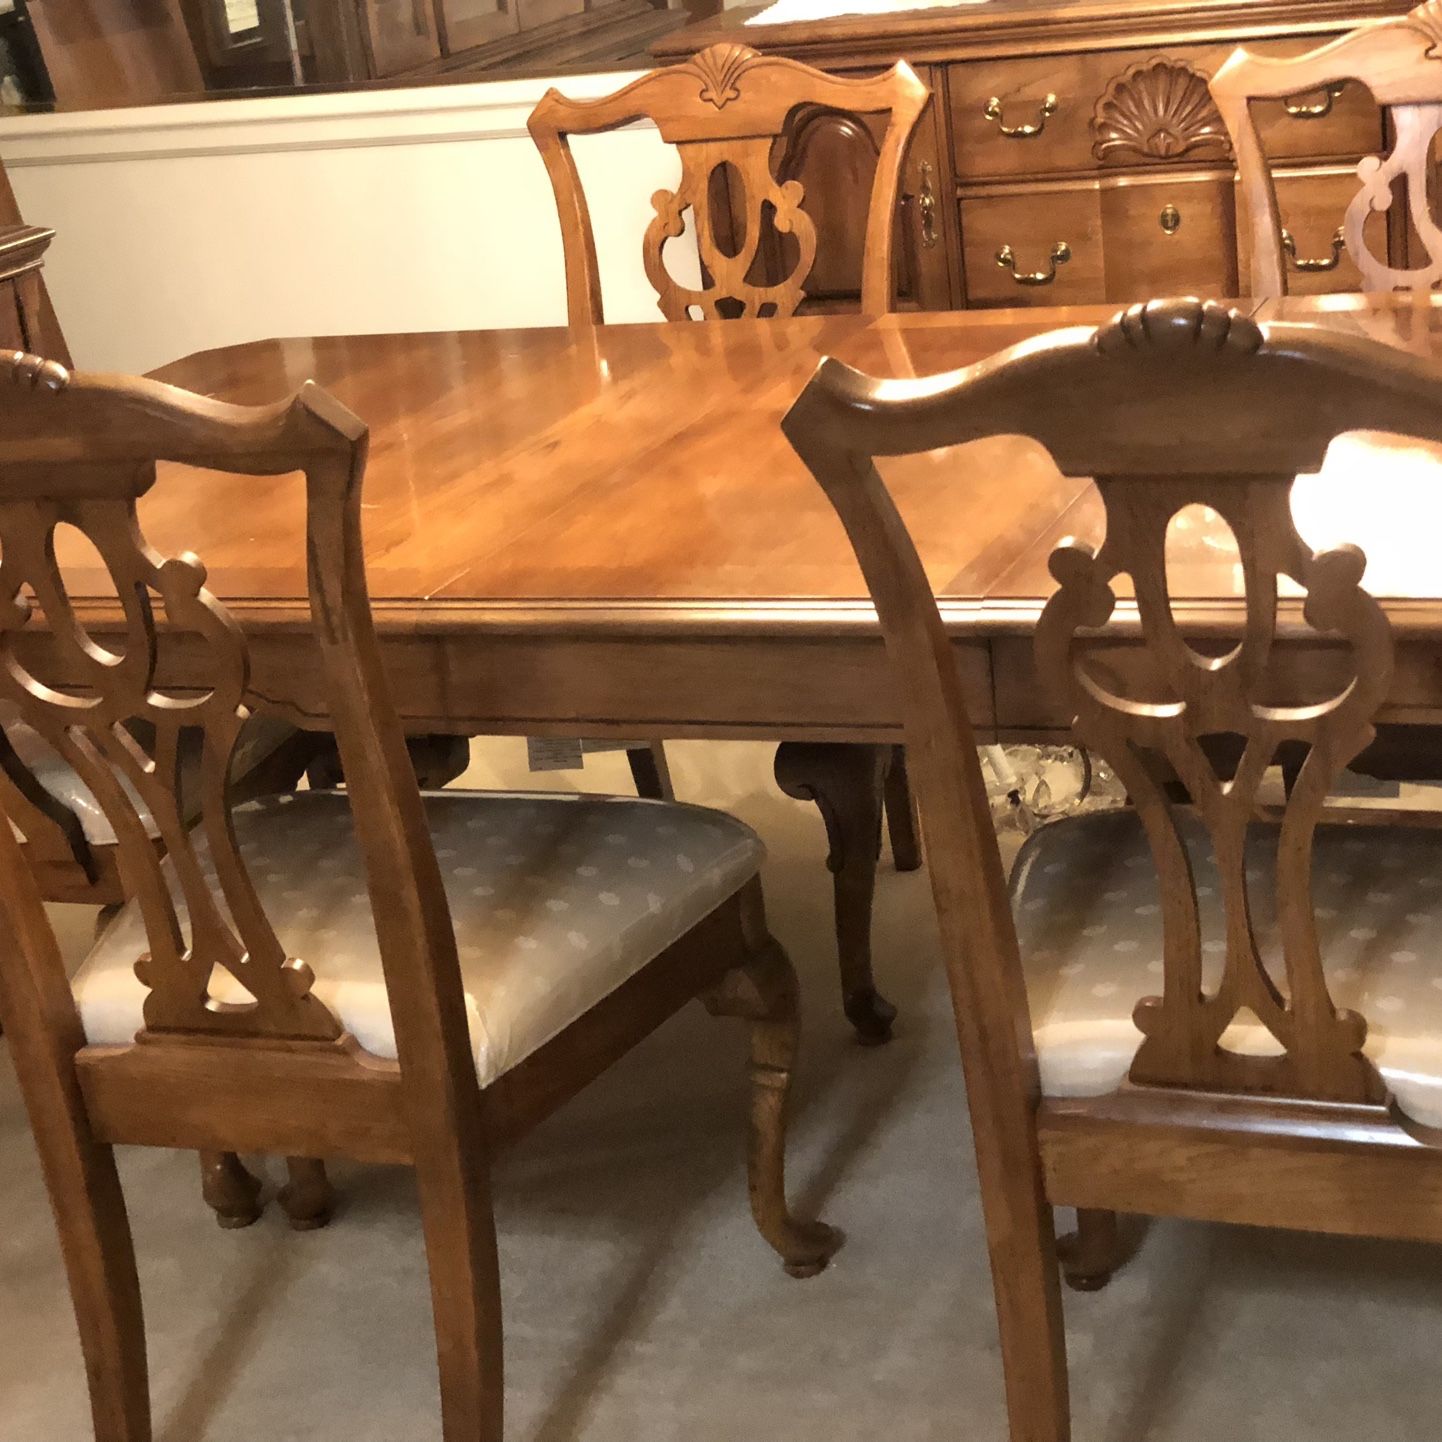 Dining Set, Table 6 Chairs Buffet, China Cabinet And Table Service